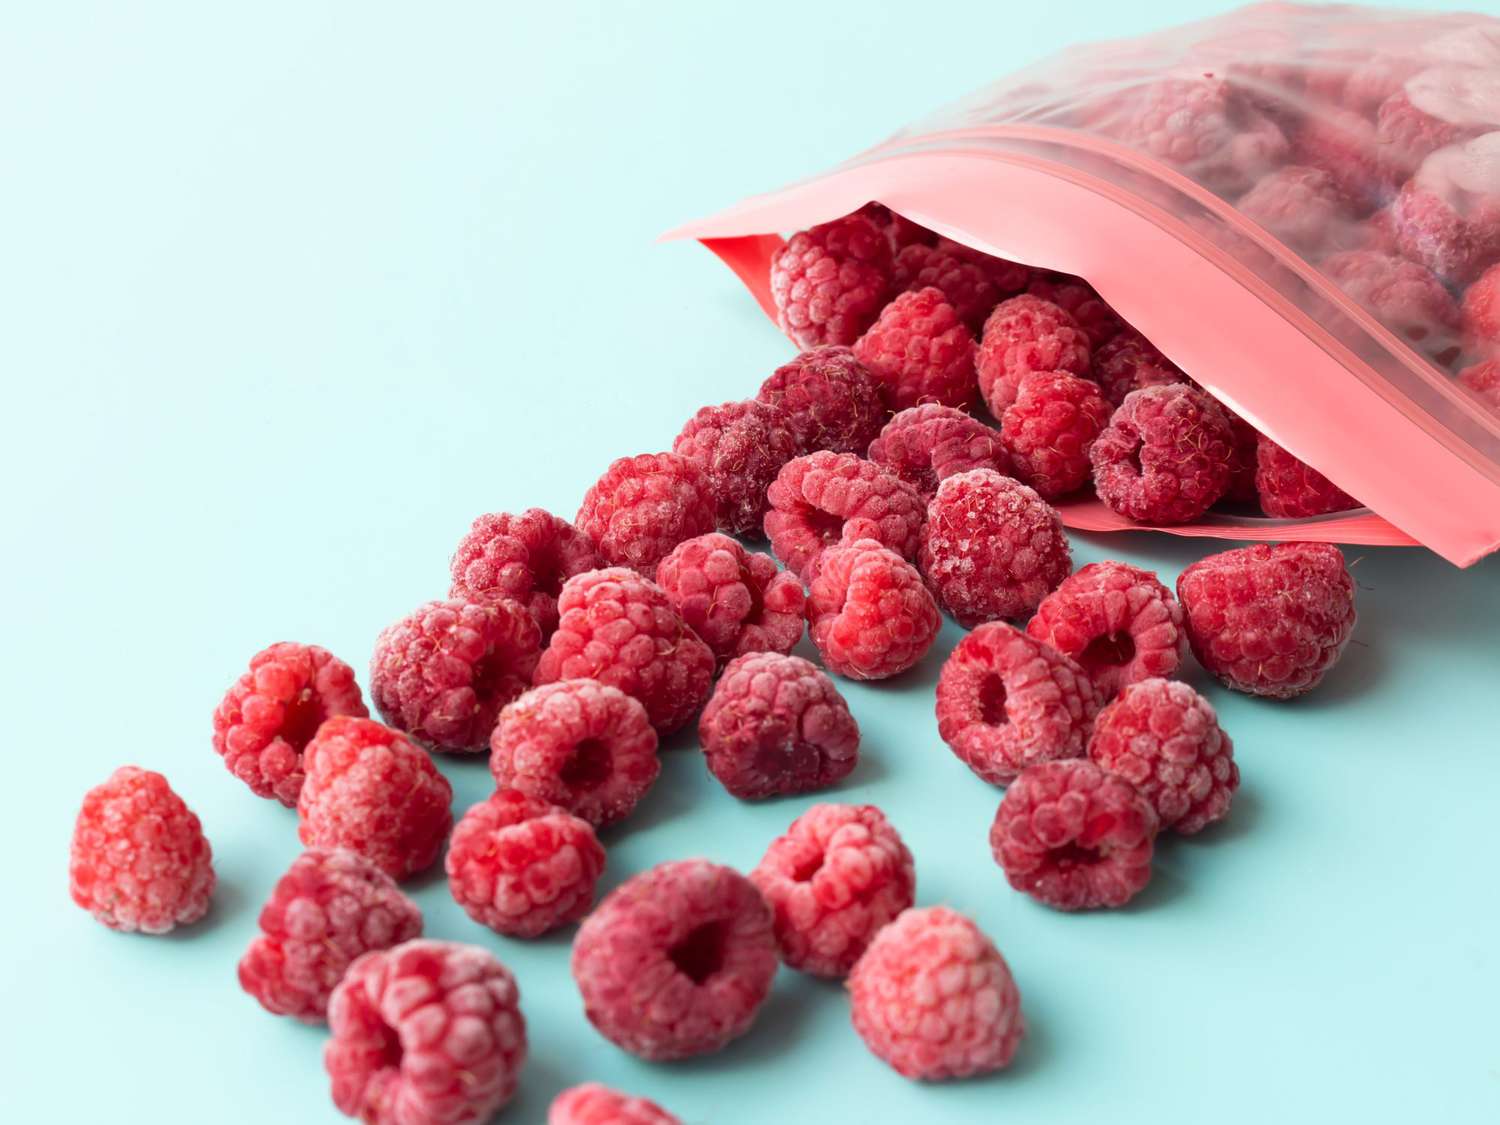 Frozen raspberries in a plastic bag with a fastener on a blue background.